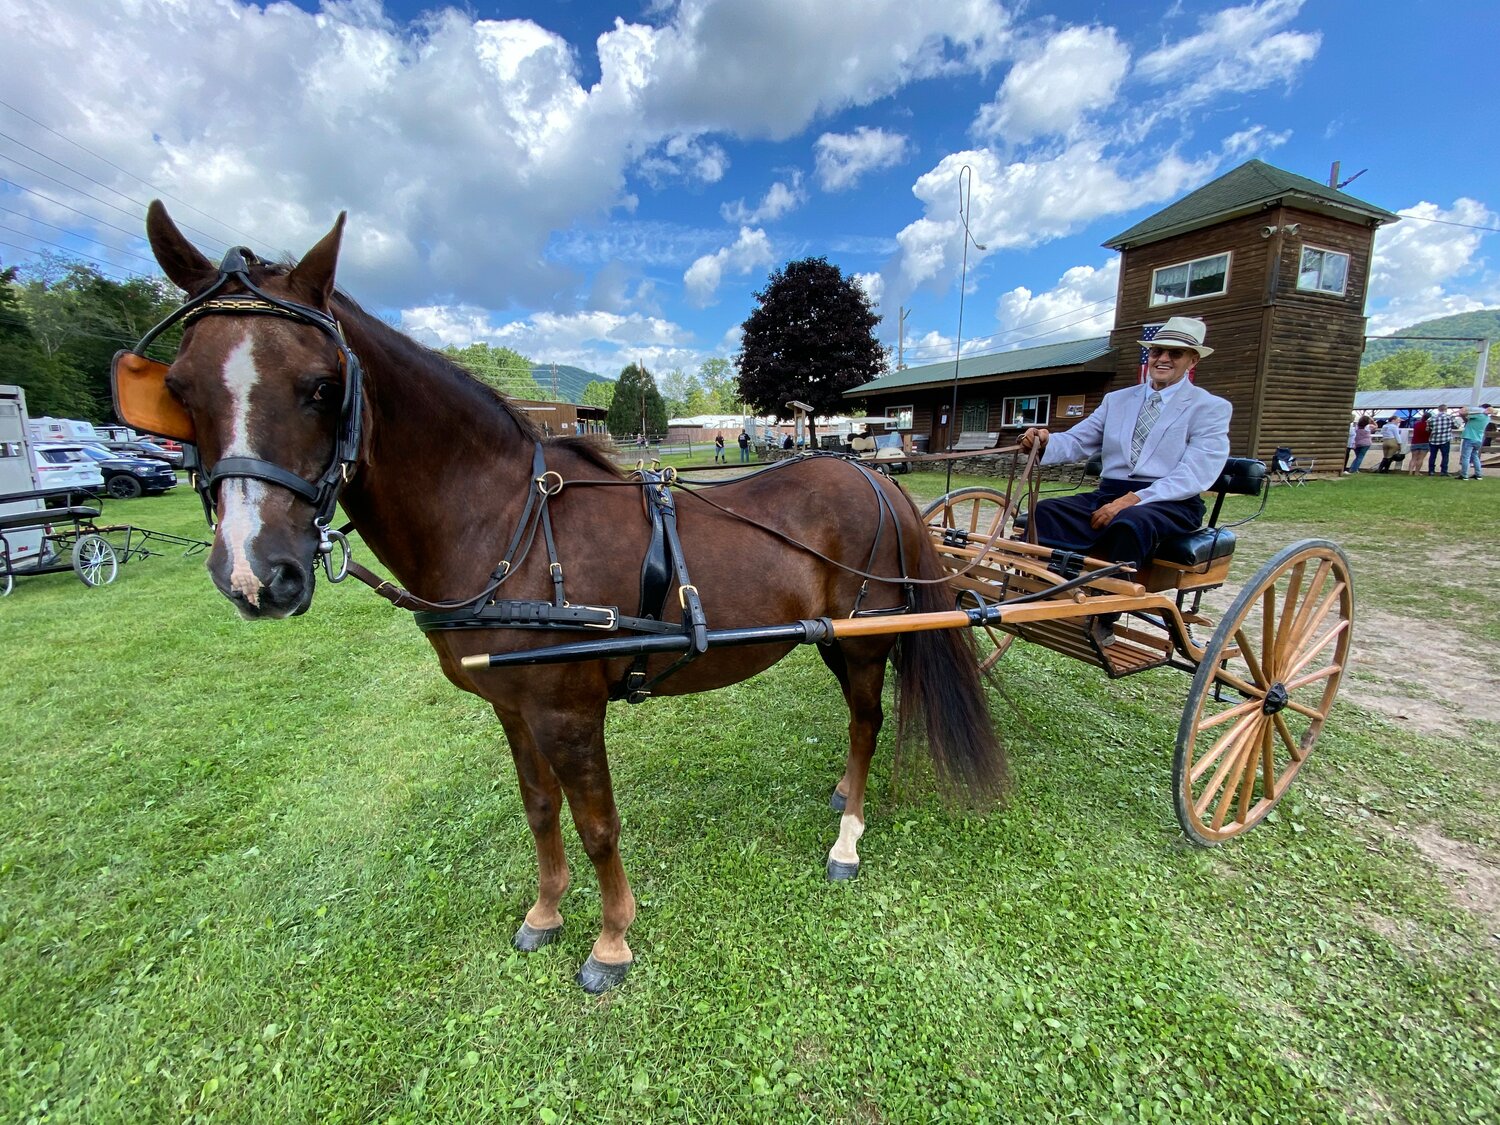 Joseph Hafele, Walton, took home the Driving Pony Reserve Champion title in Sunday’s competition at the 136th annual Delaware County Fair, Aug. 13.